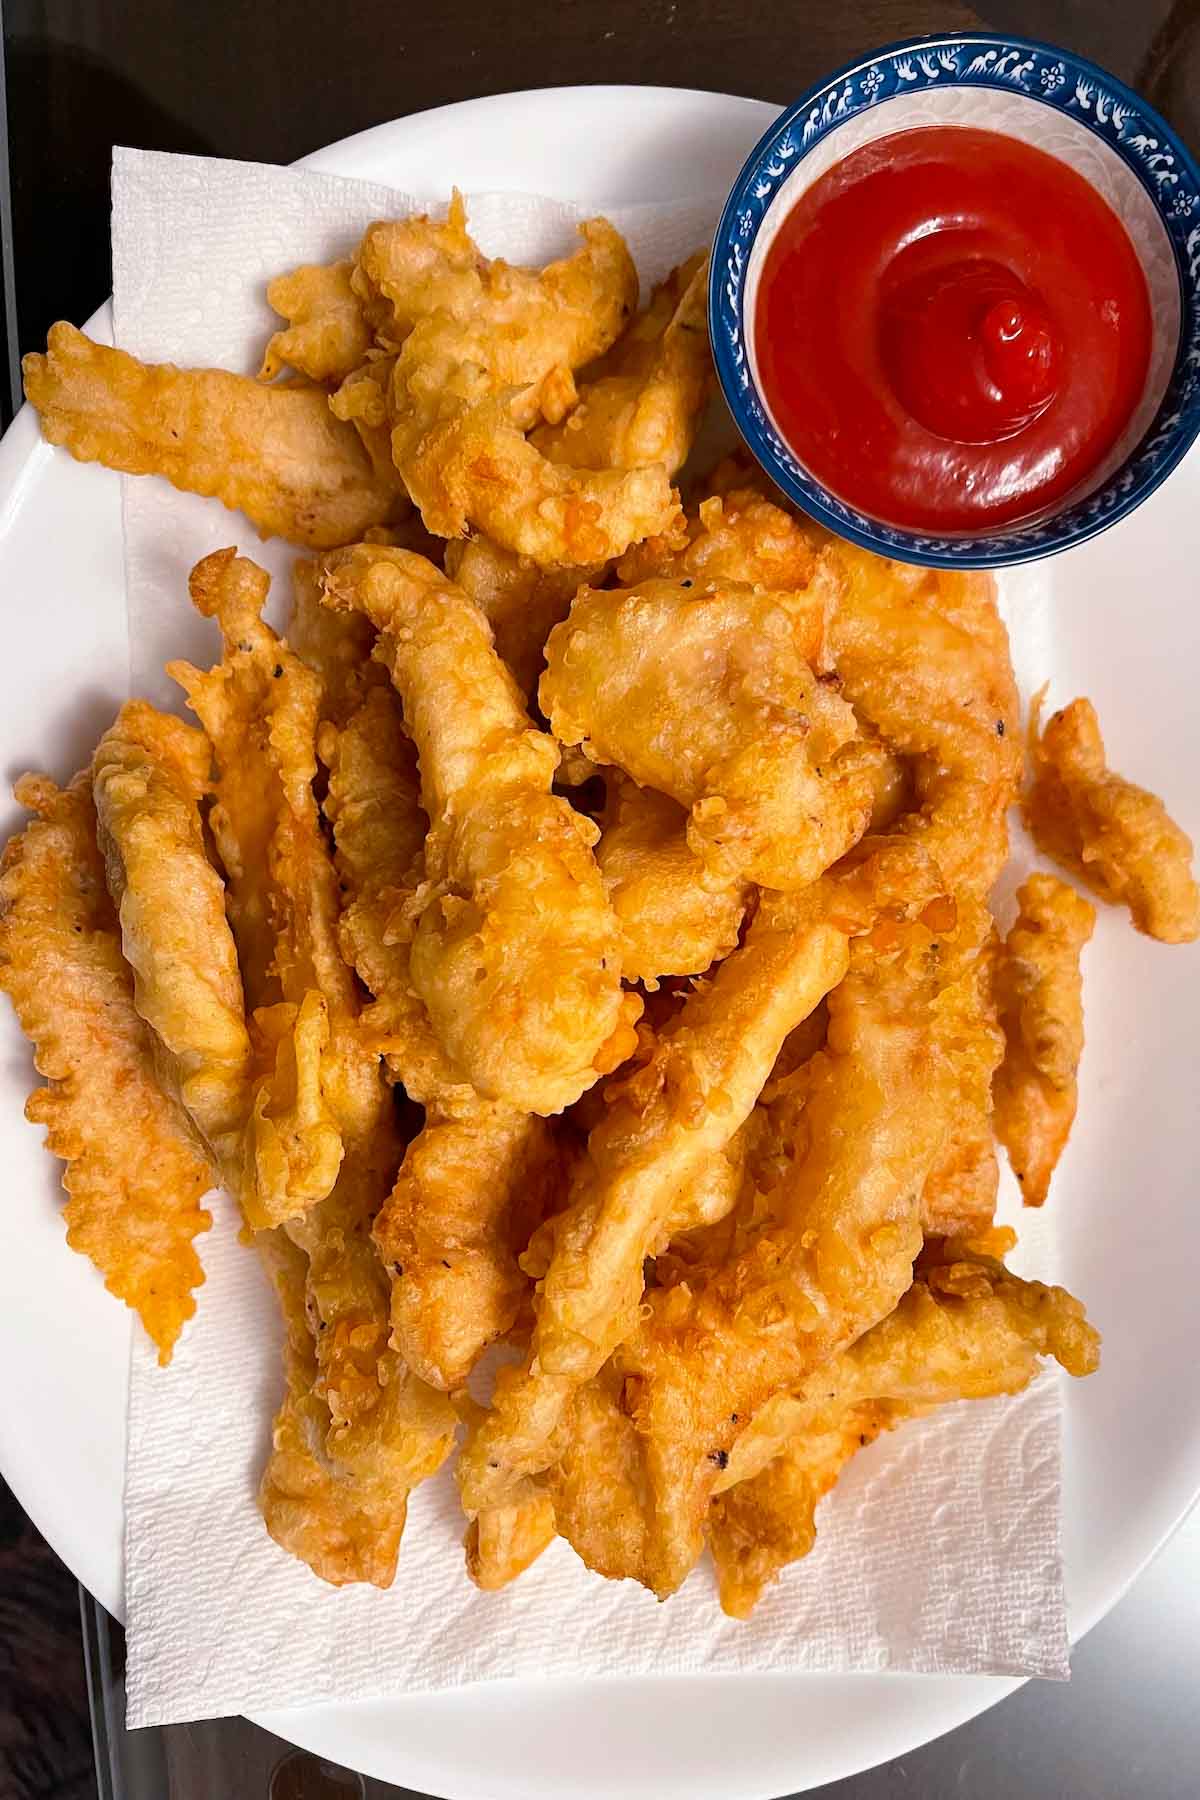 Besides sushi, another delicious menu item at Japanese restaurants is Chicken Tempura. These chicken tenders are light and crispy on the outside, with a juicy, meaty center. Enjoy them as an appetizer with your favorite dipping sauce, or use them to create fun and tasty bento boxes for lunch!